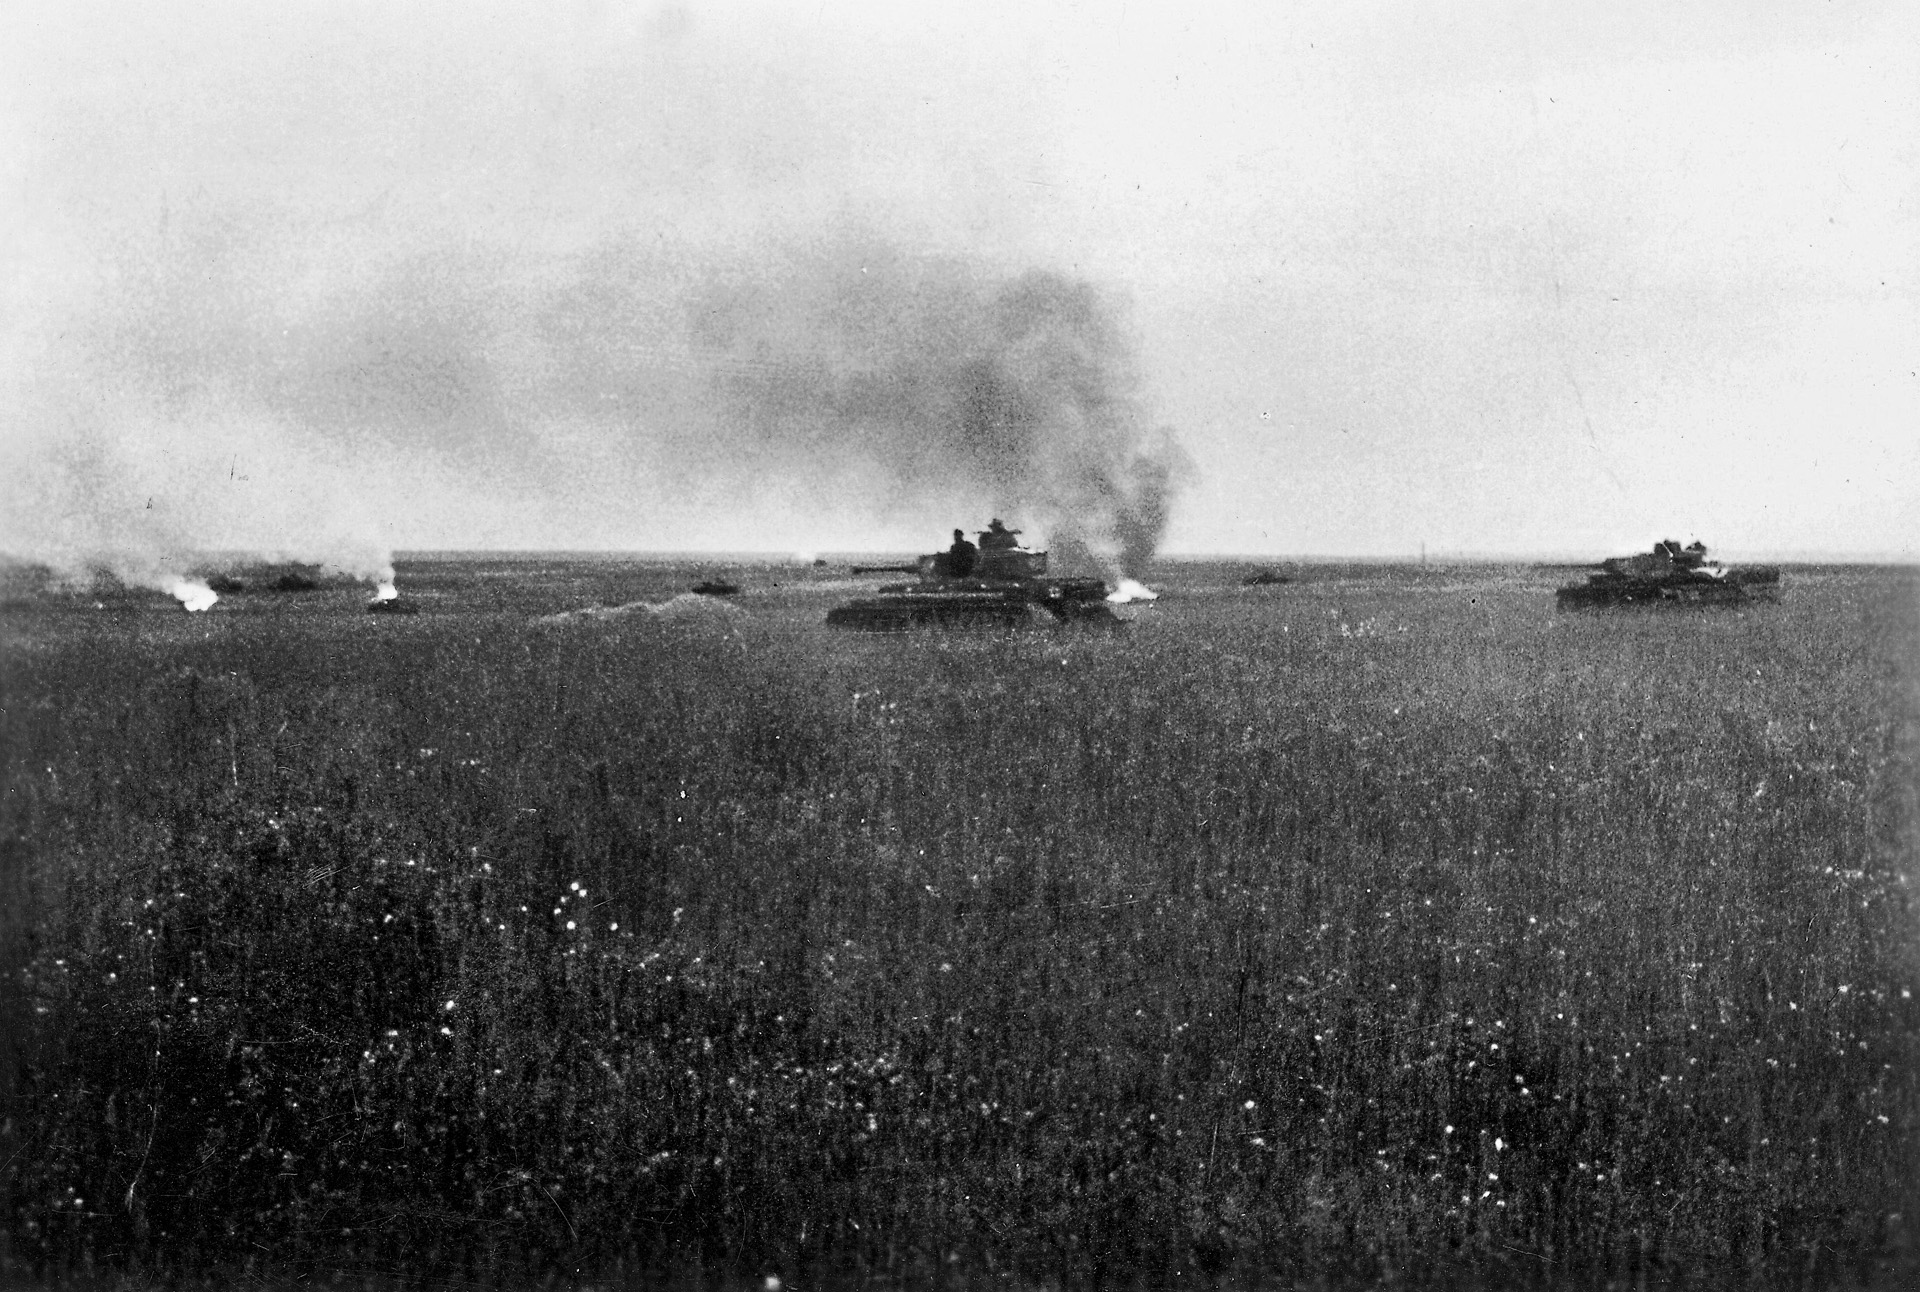 Plumes of smoke rise from disabled tanks and armored vehicles as German tanks move cautiously forward on the Russian steppe during the Battle of Kursk. 